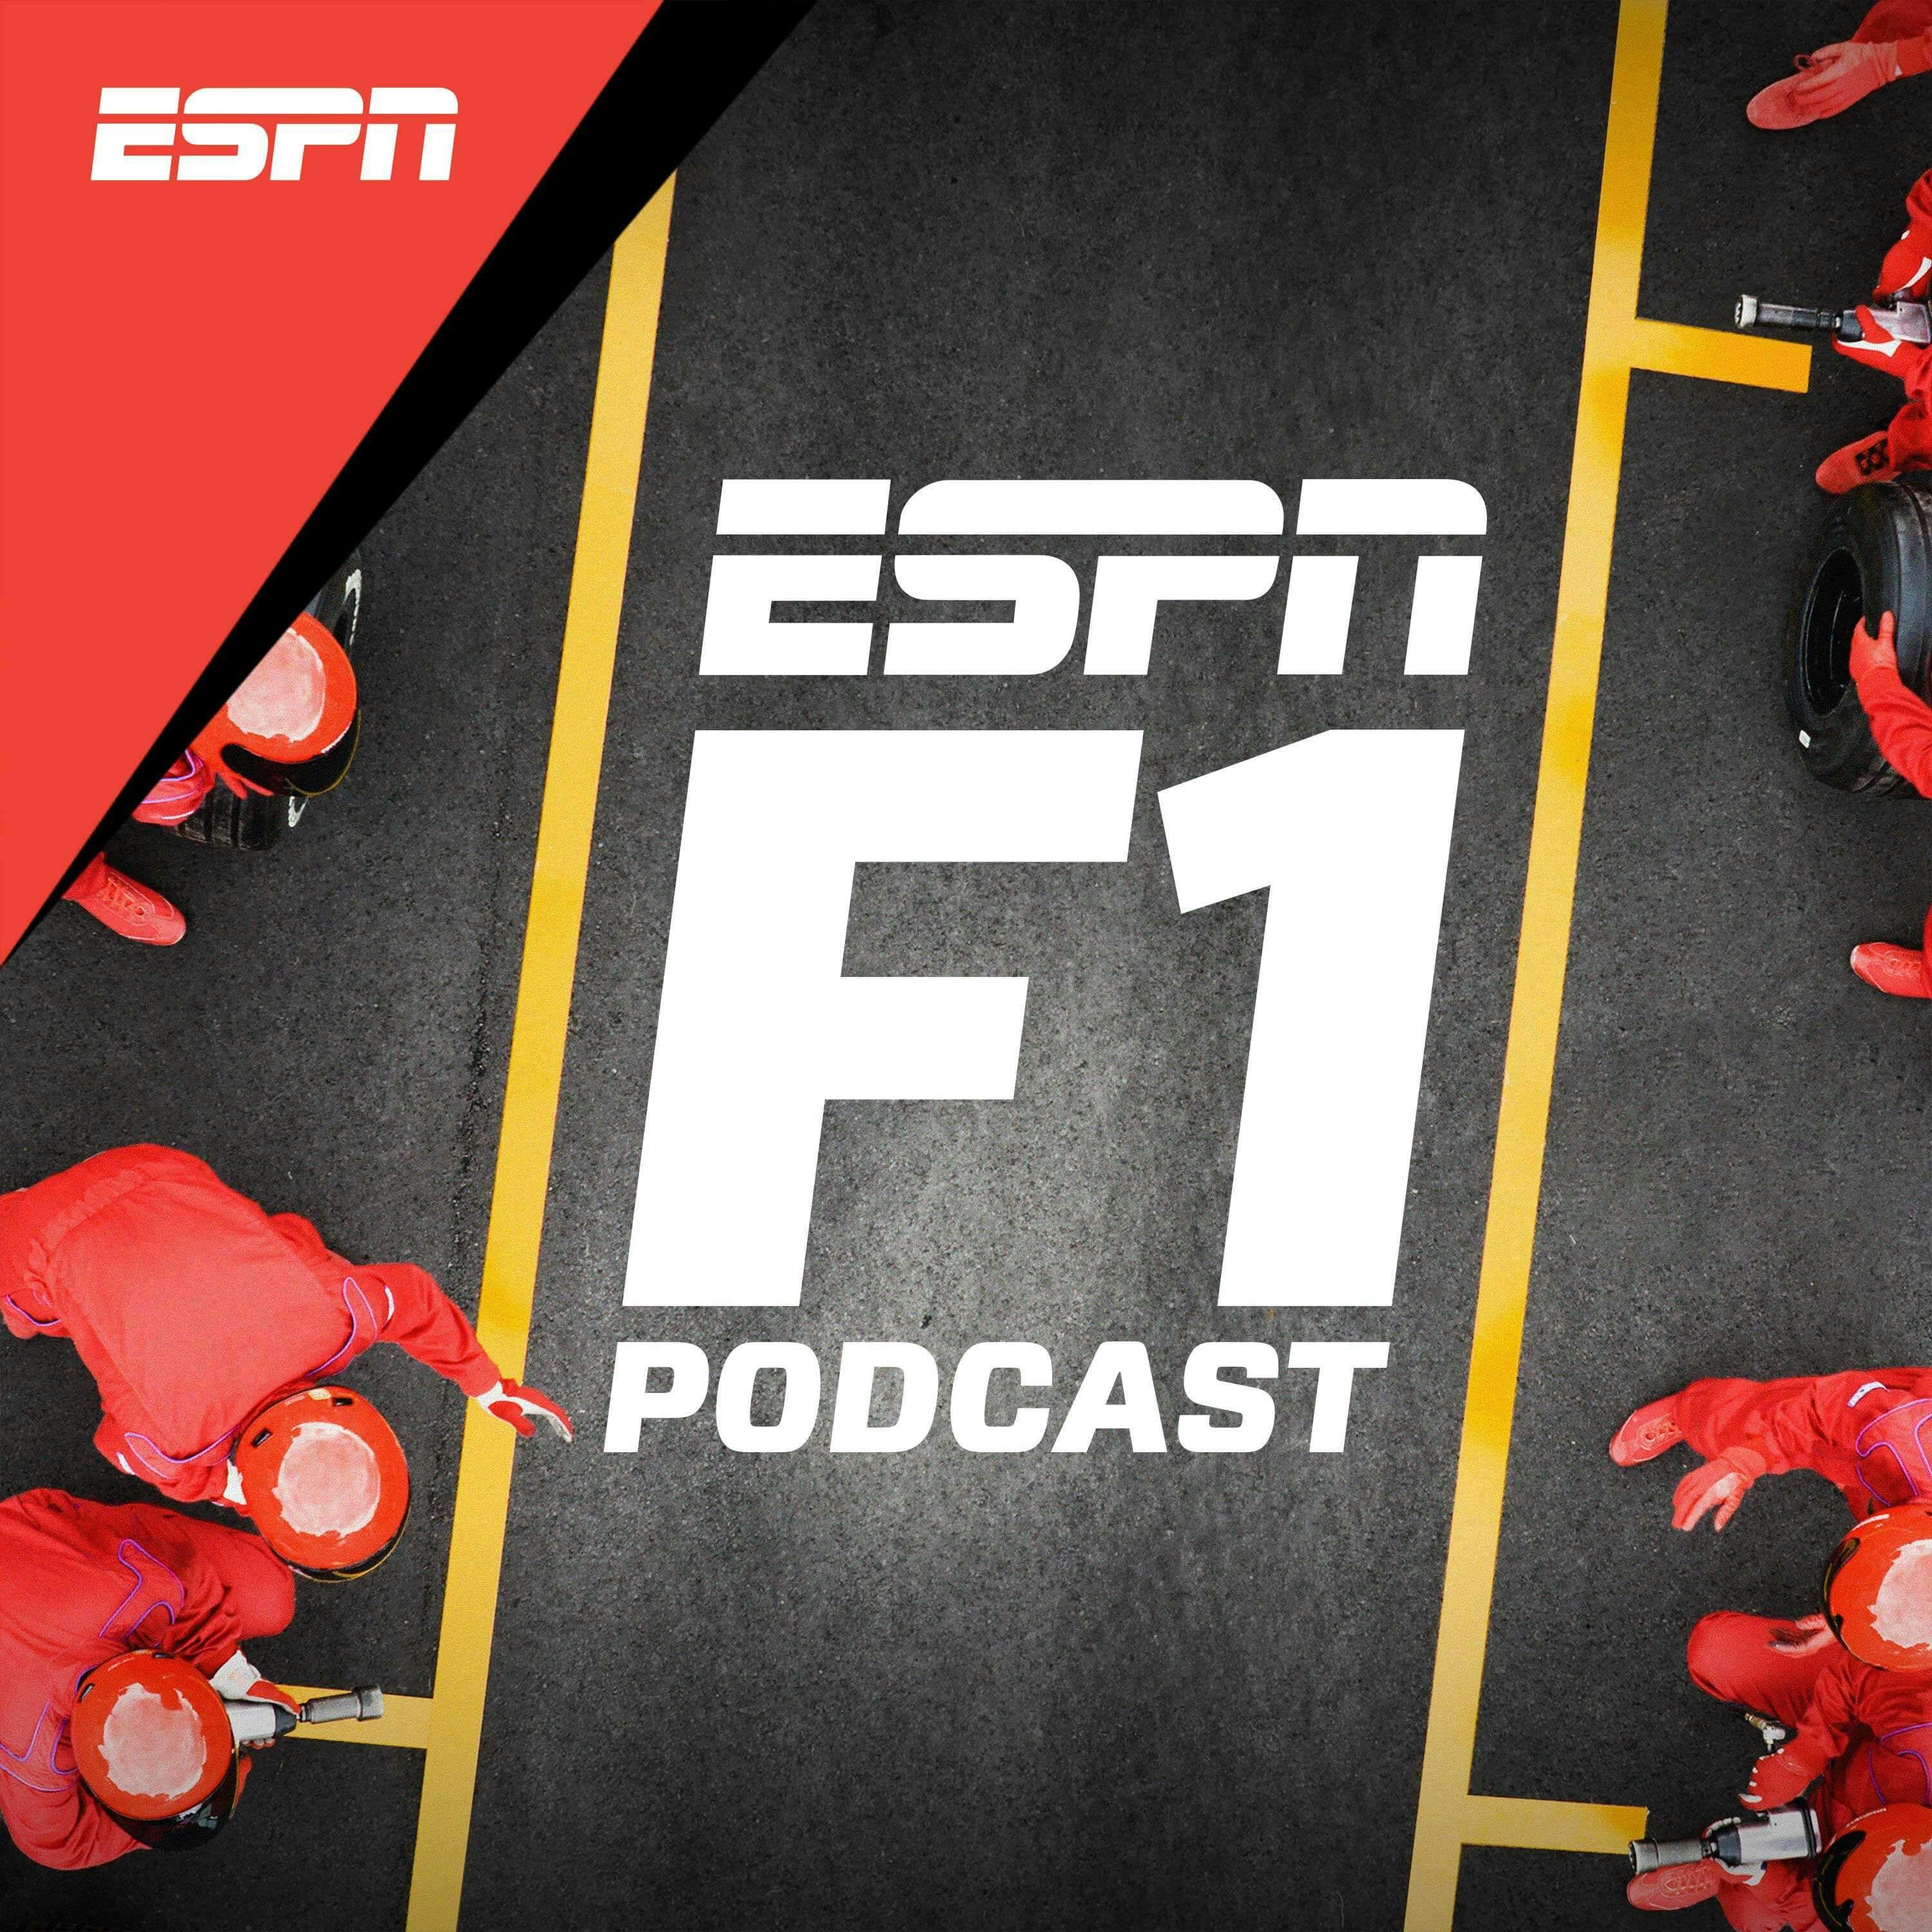 The ESPN F1 Podcast